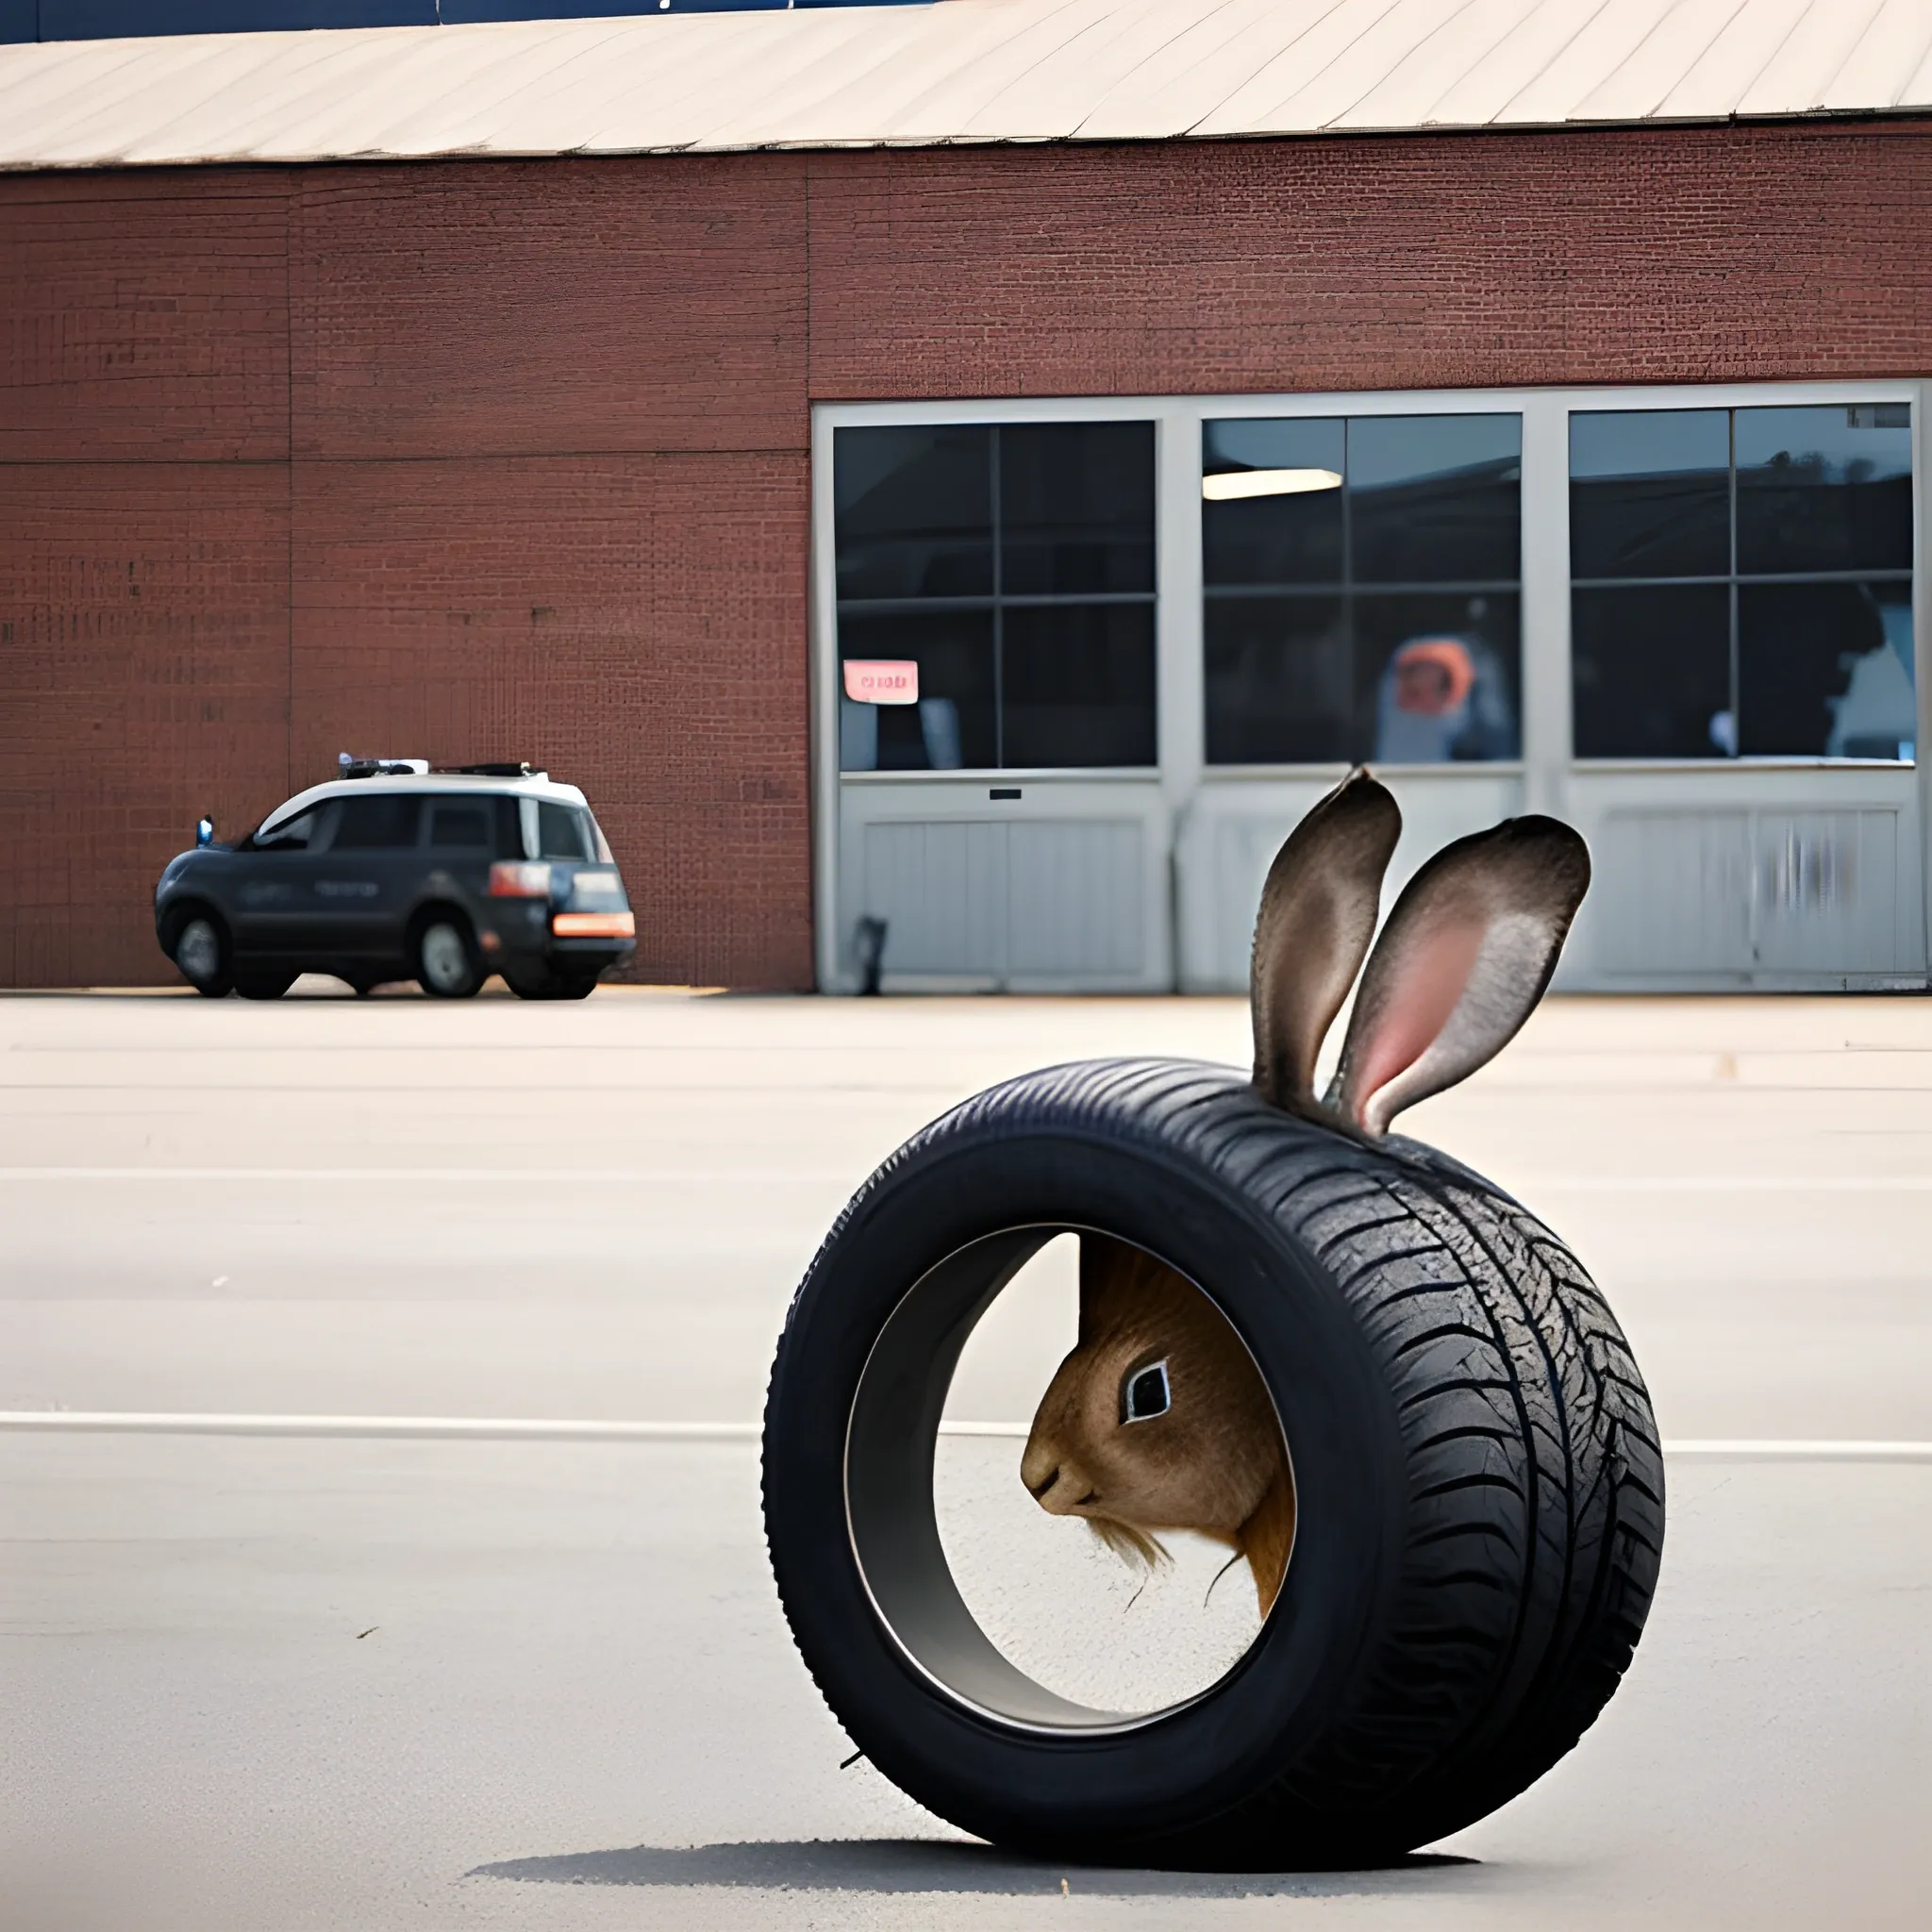 a large rabbit devours tire in front of a factory, photograph